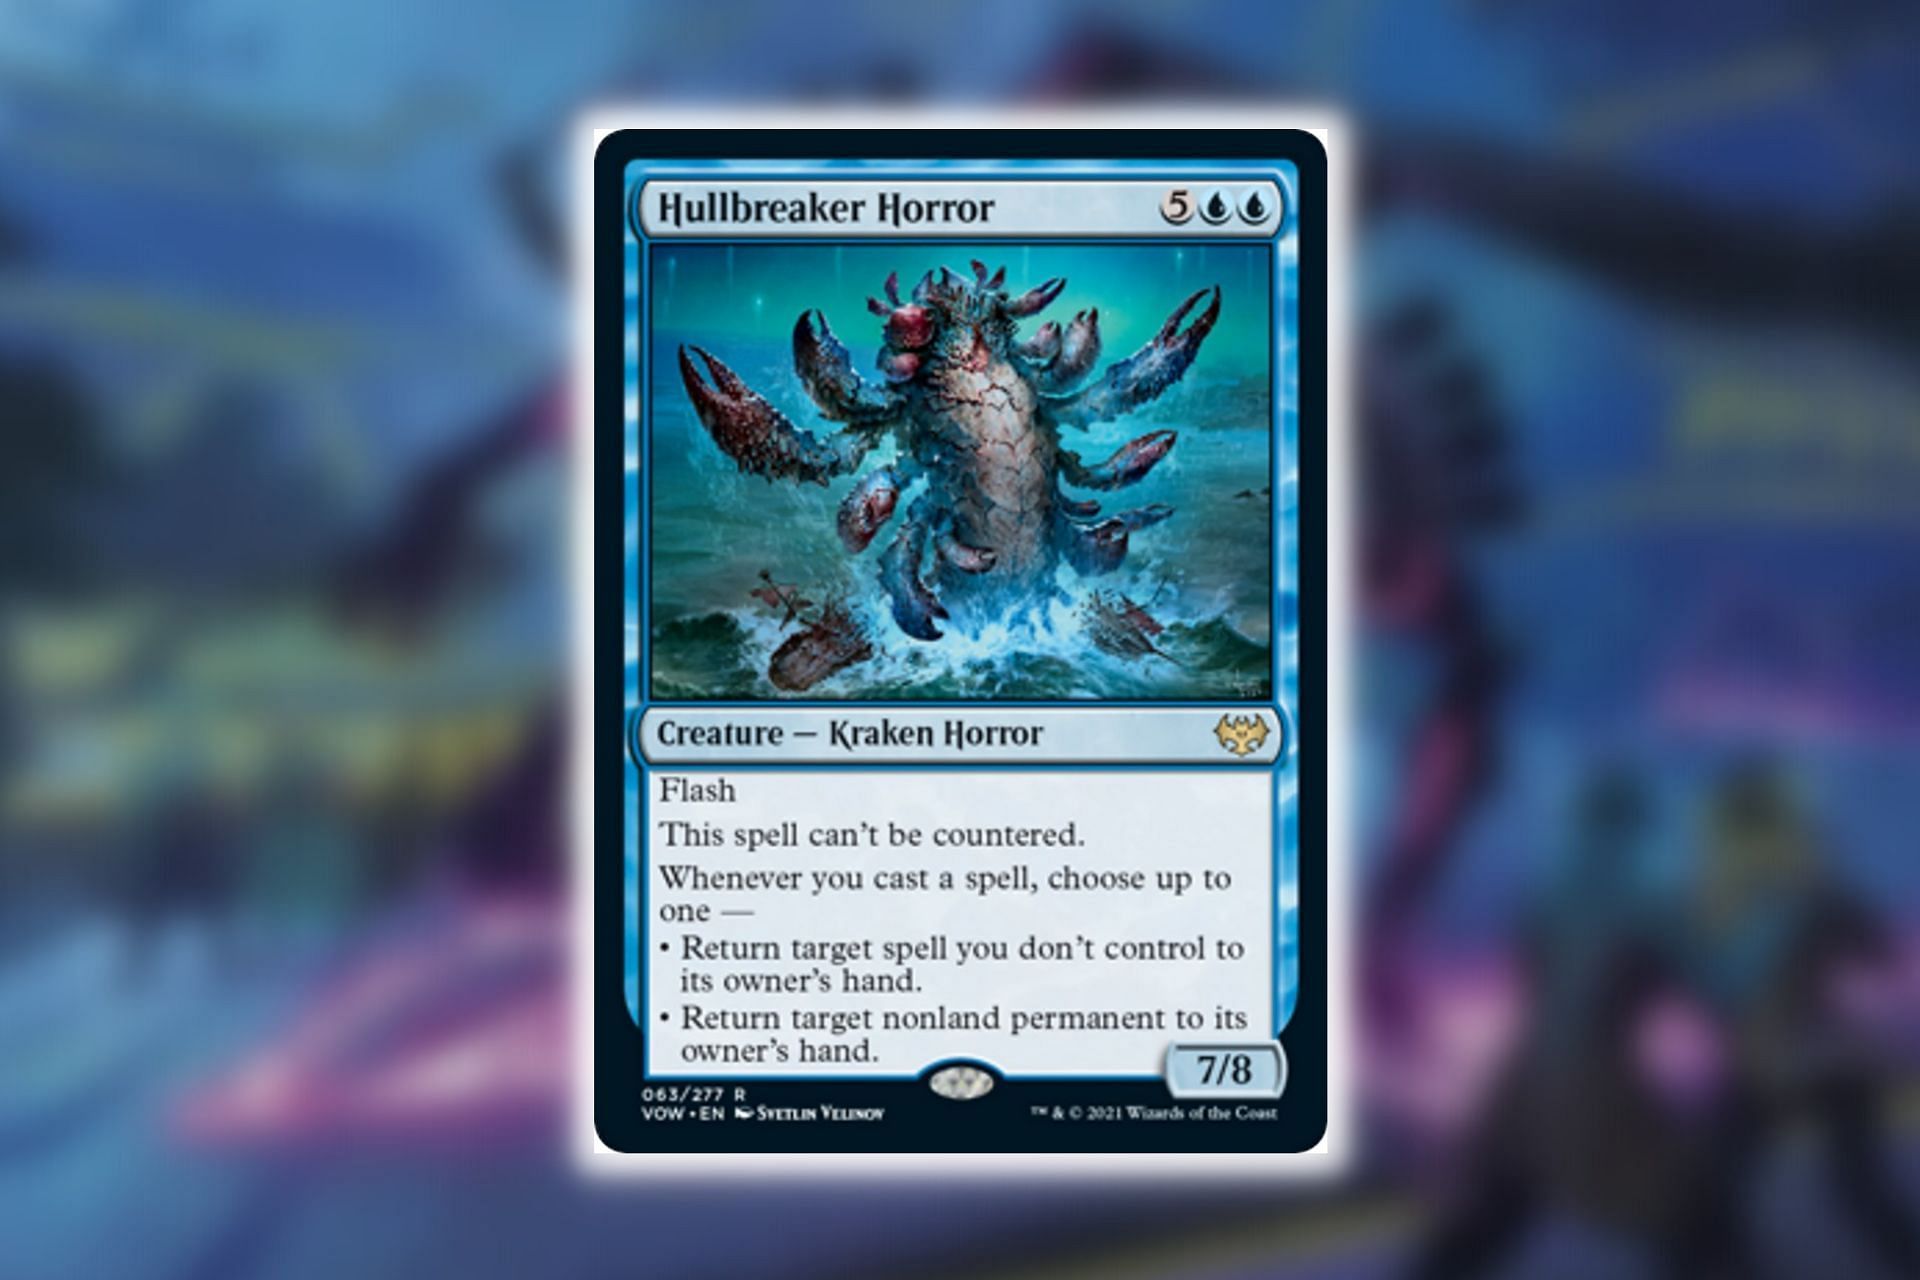 Hullbreaker Horror in Magic: The Gathering (Image via Wizards of the Coast)